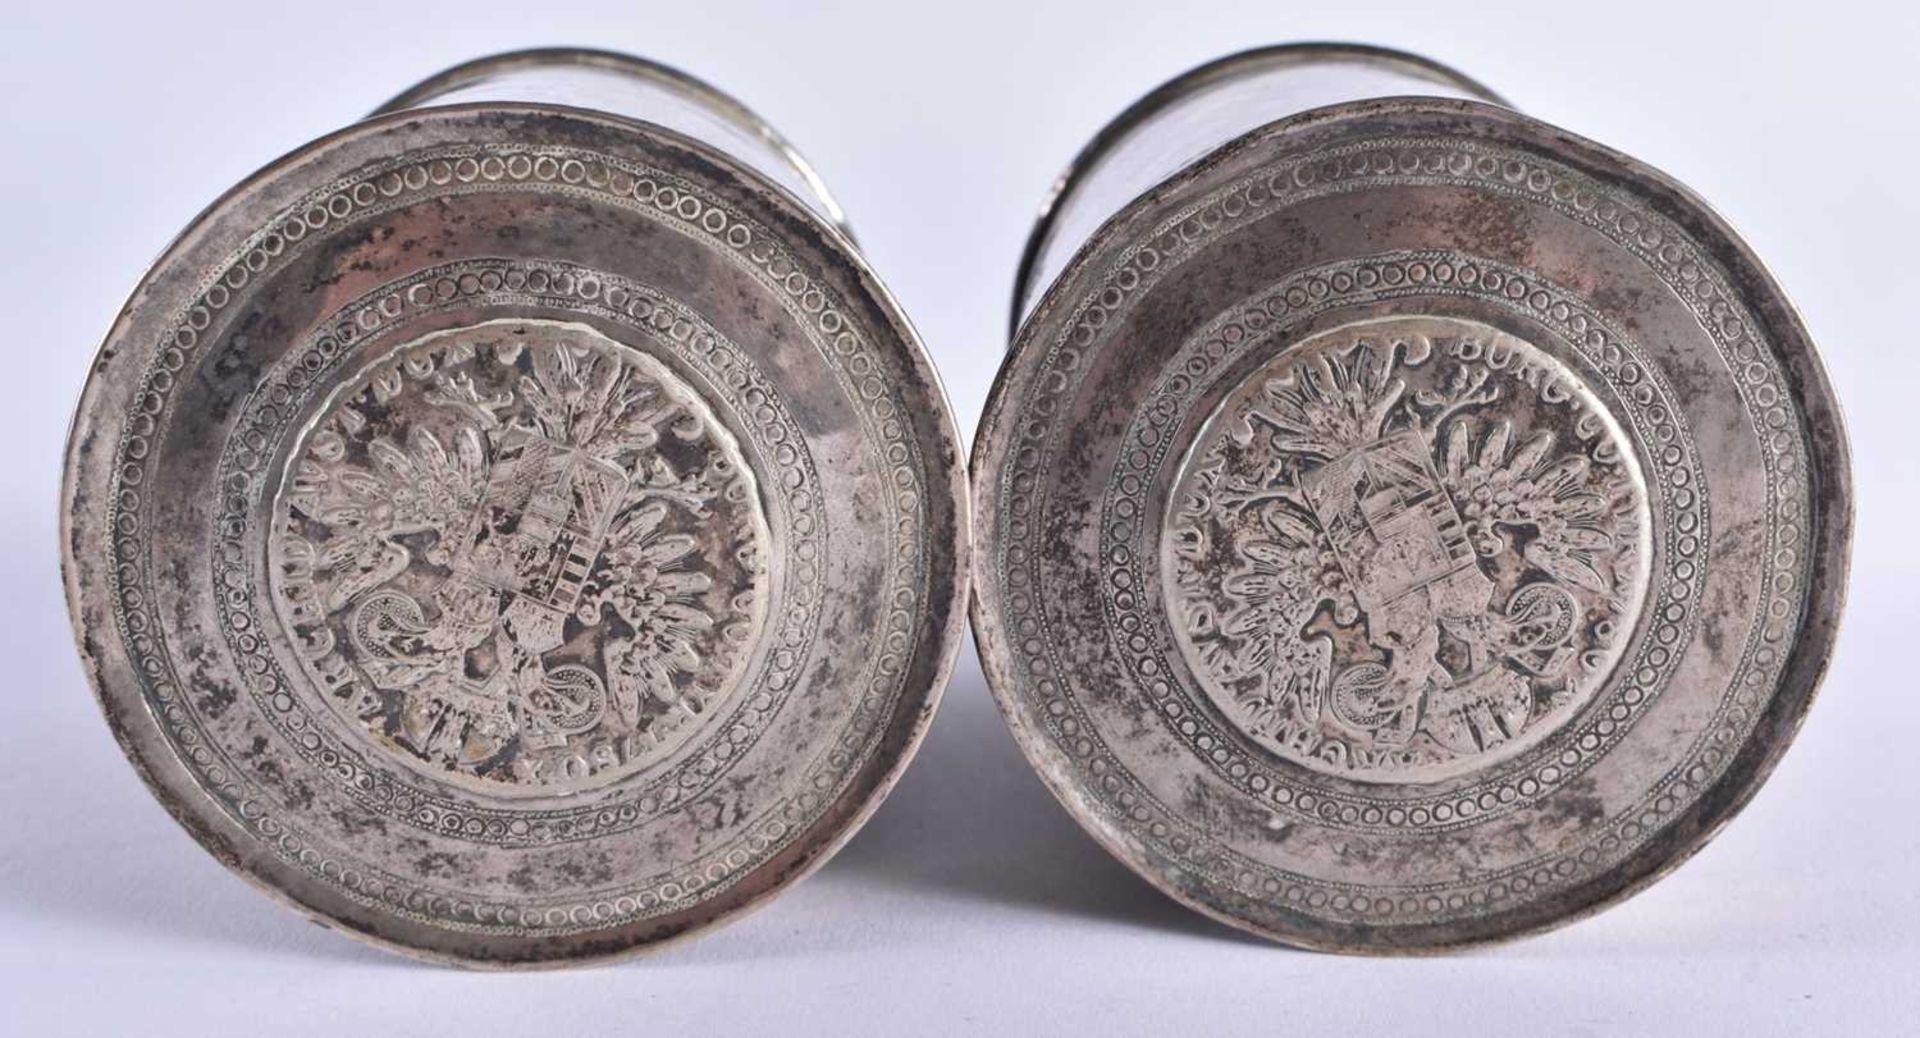 A PAIR OF ANTIQUE CONTINENTAL SILVER COIN INSET BOXES AND COVERS. 344 grams. 9 cm x 7.25 cm. - Image 3 of 6